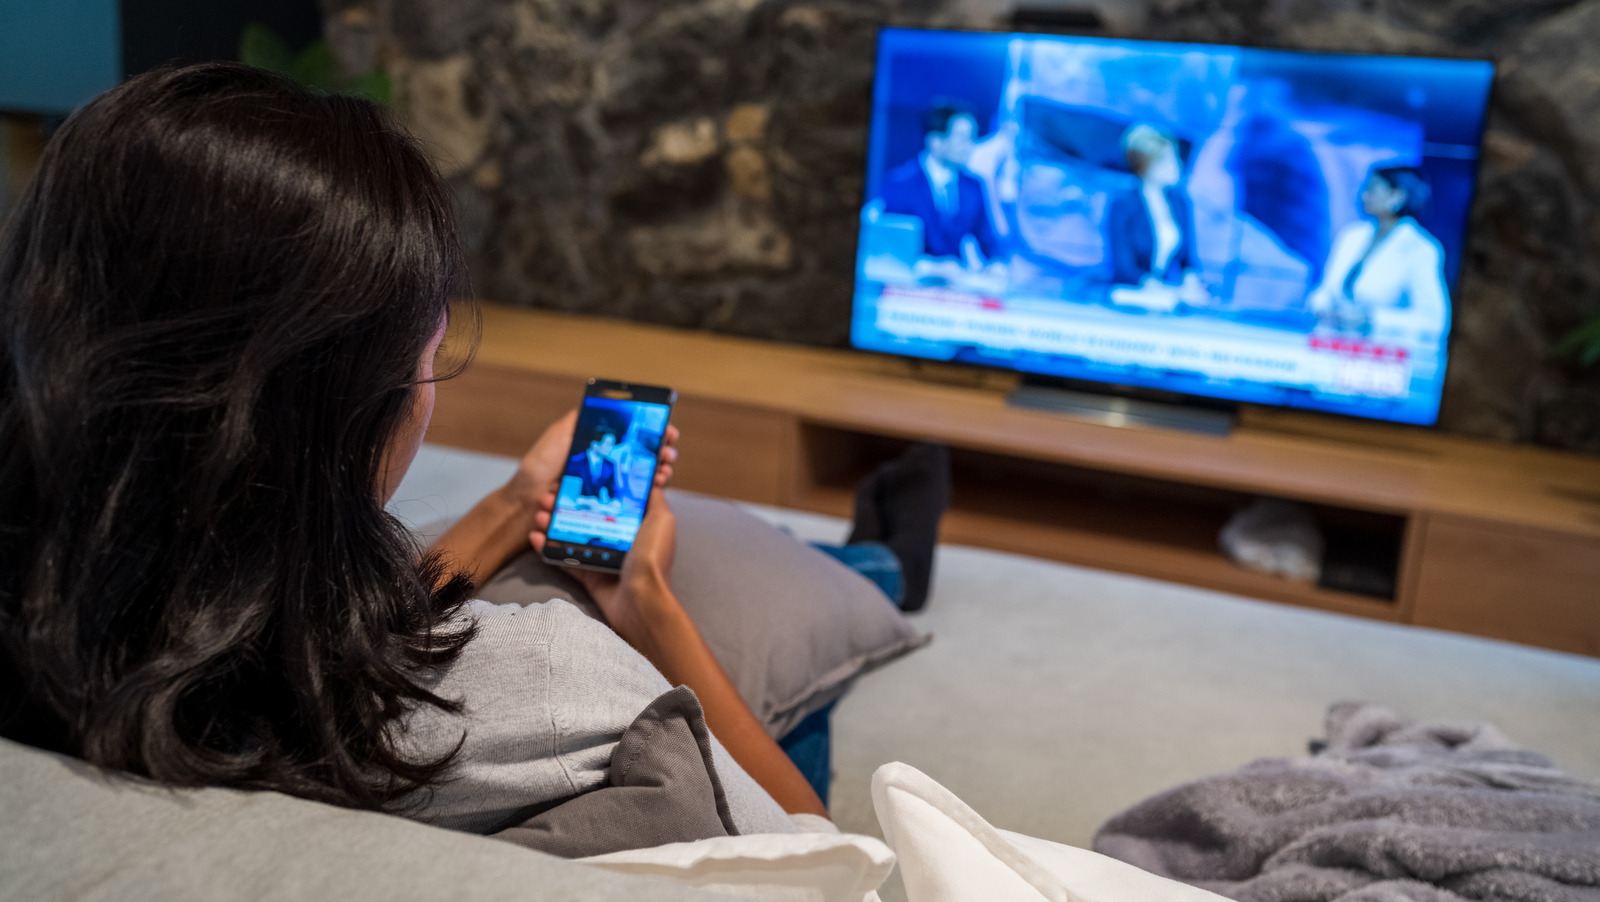 What's The Difference Between Screen Mirroring And Casting To A Smart TV?